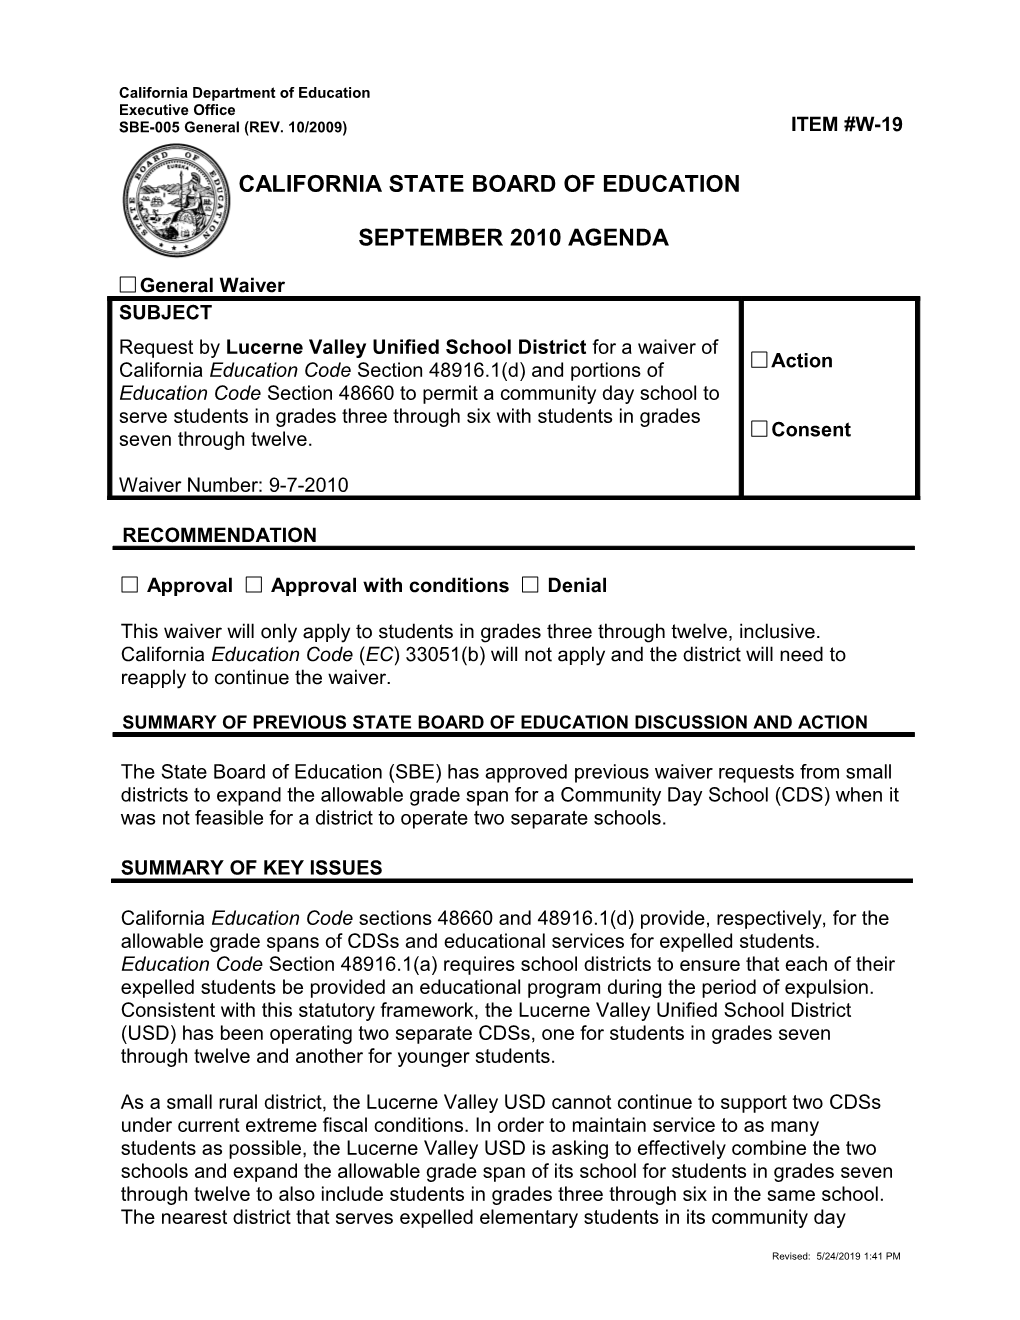 September 2010 Waiver Item W19 - Meeting Agendas (CA State Board of Education)